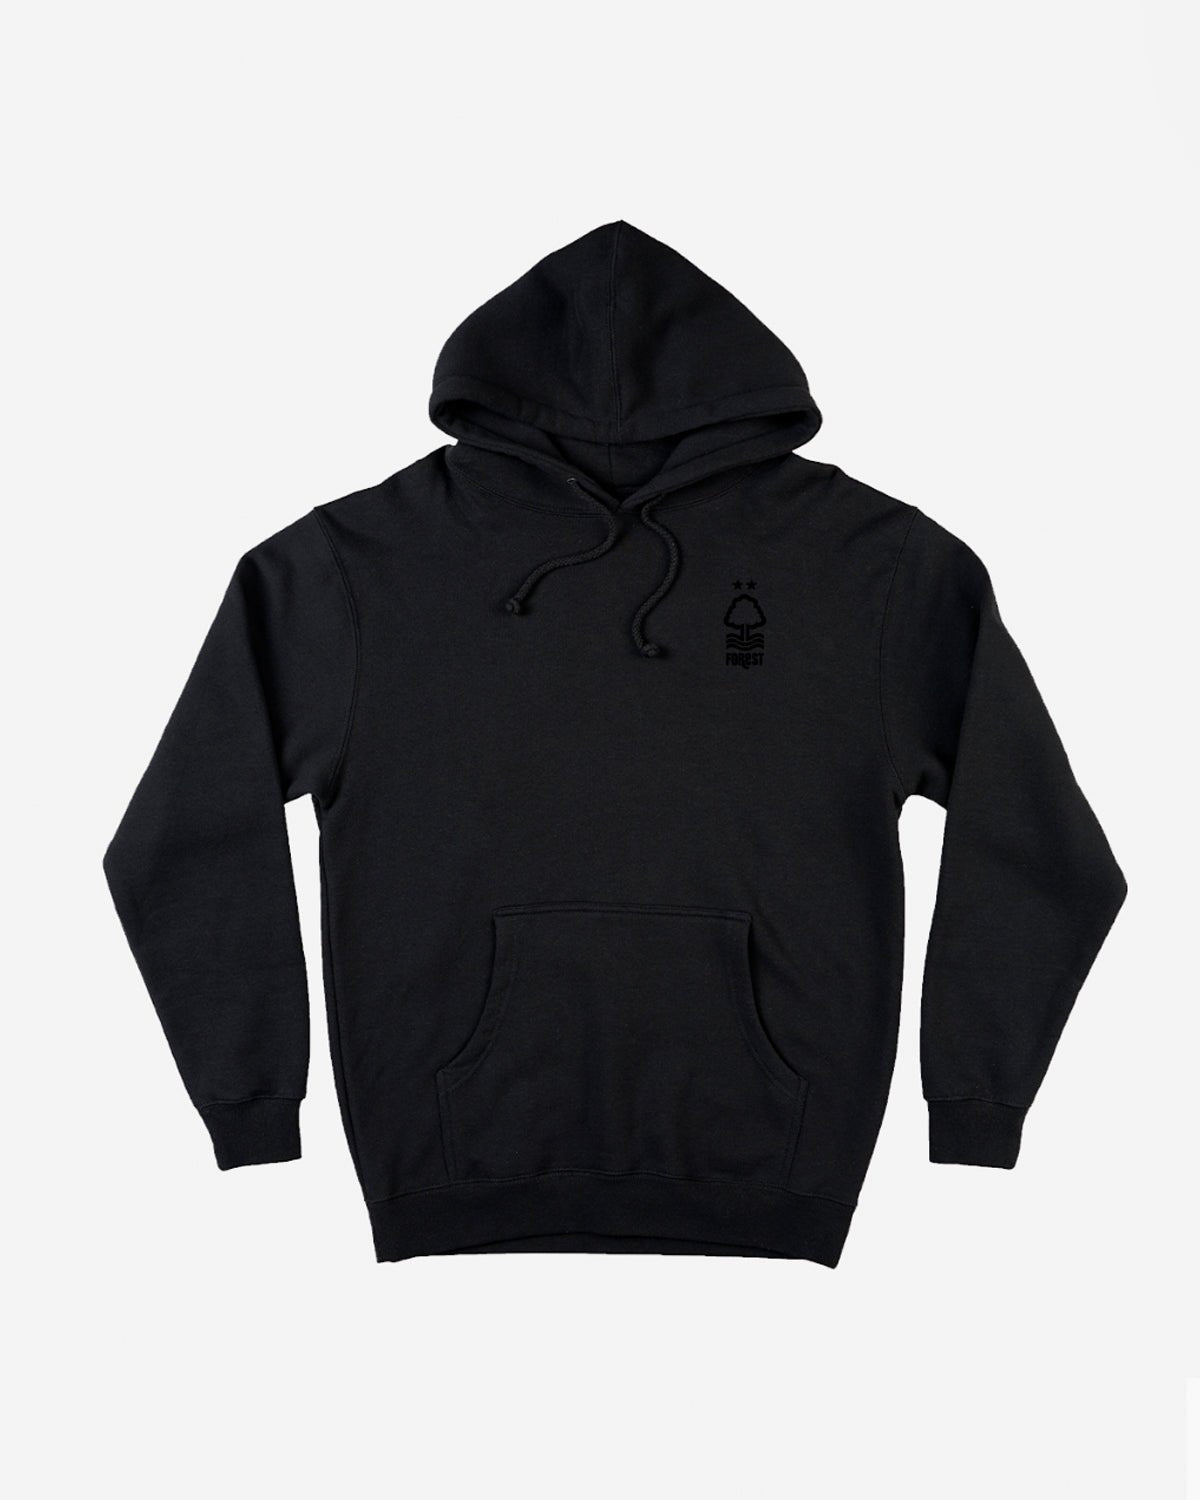 NFFC Blackout Overhead Hoodie - Nottingham Forest FC